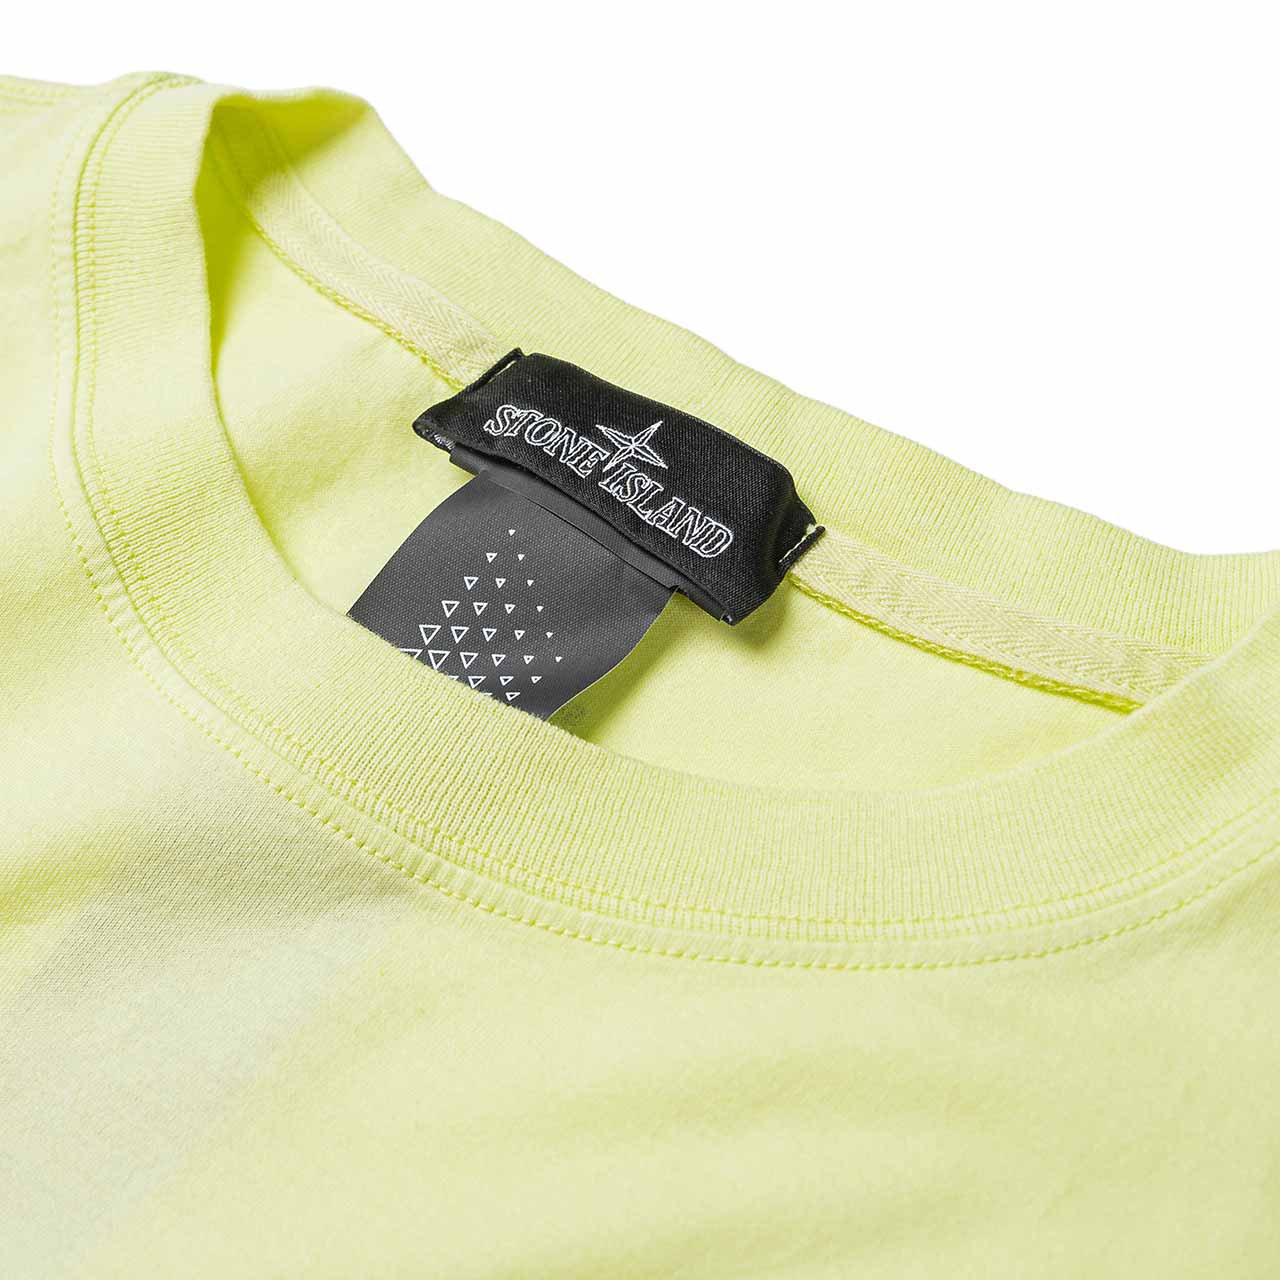 stone island shadow project t-shirt (yellow) - 701920510.v0051 - a.plus - Image - 5